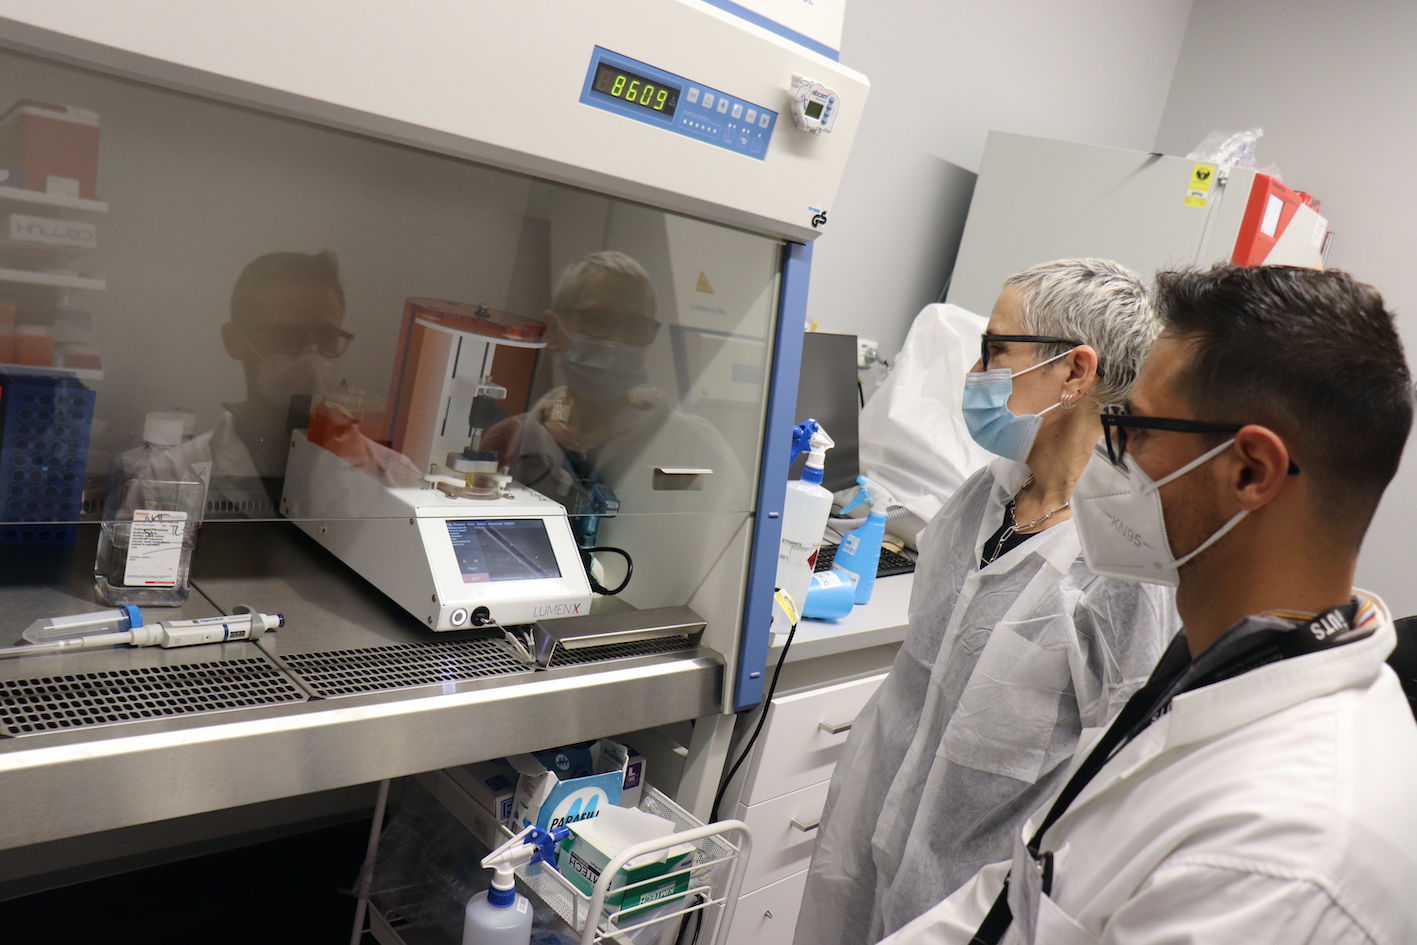 Bioporinting with the LumenX in the UTS lab, Carmine Gentile and Linda Dement